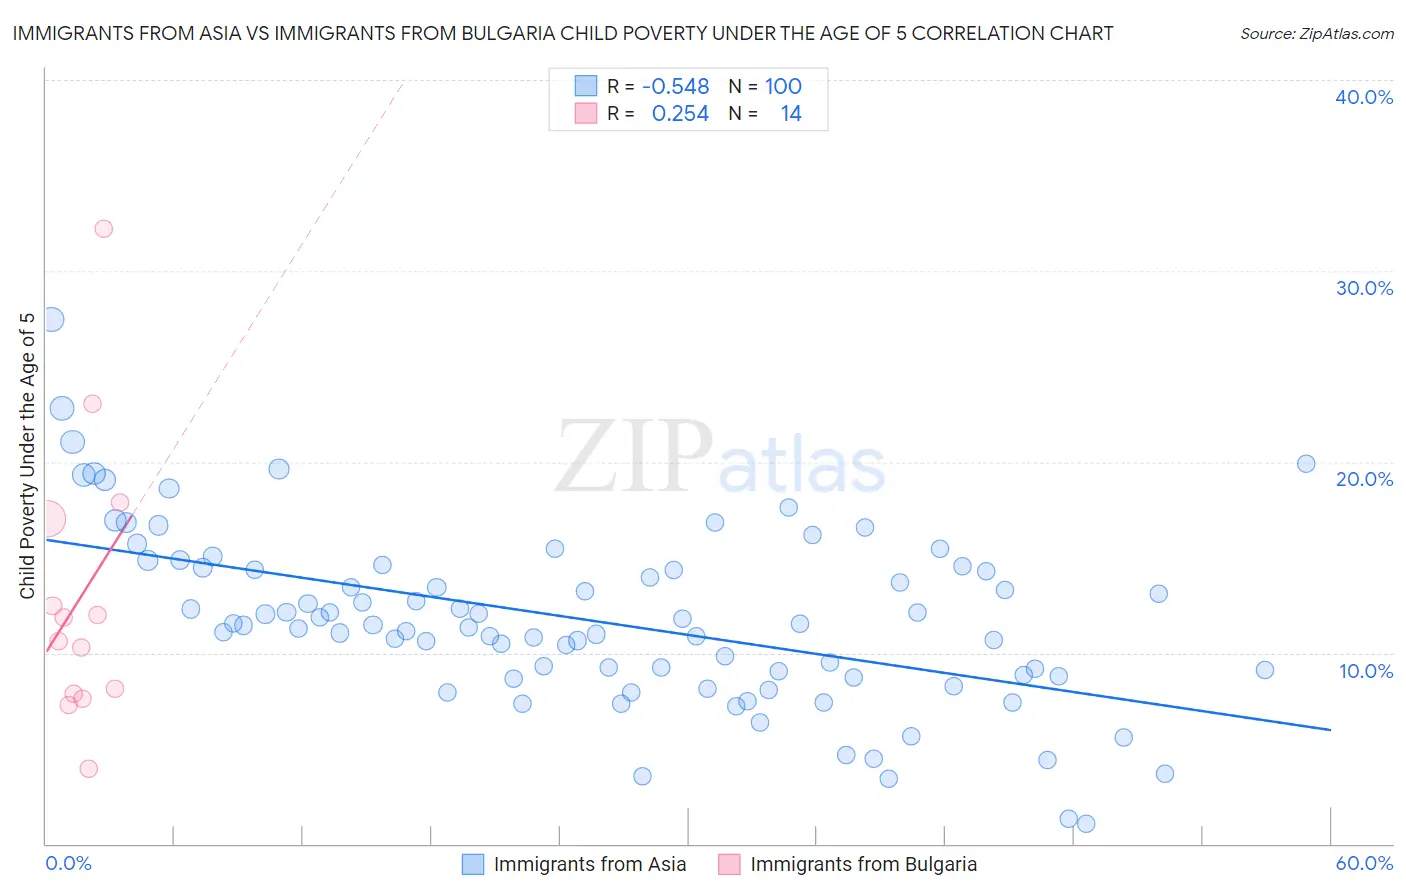 Immigrants from Asia vs Immigrants from Bulgaria Child Poverty Under the Age of 5